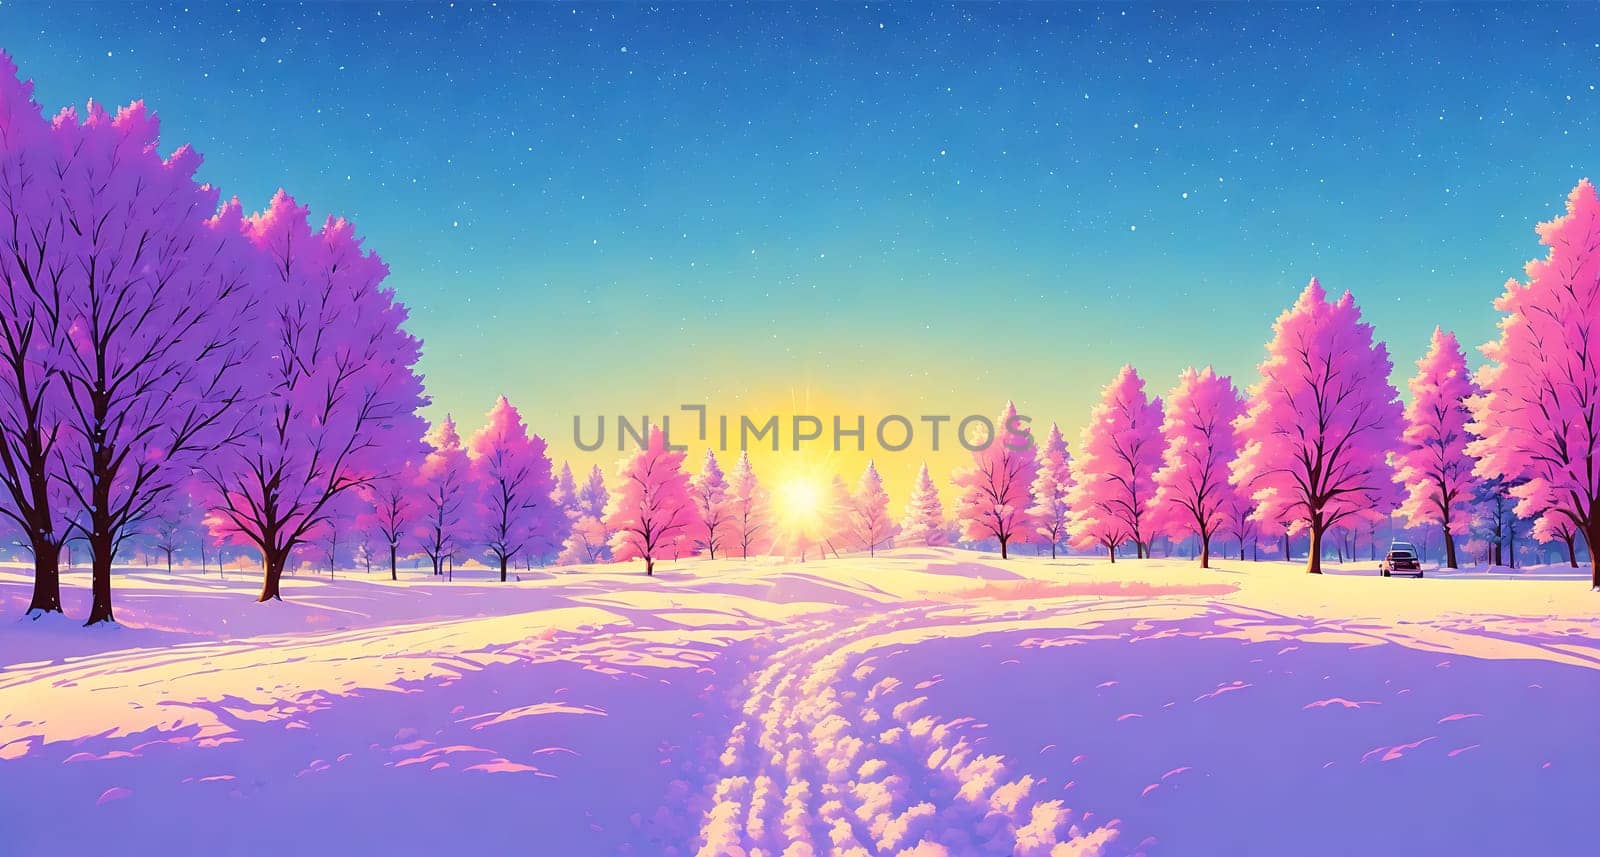 The image depicts a winter scene with pink trees in the foreground and a snowy landscape in the background.